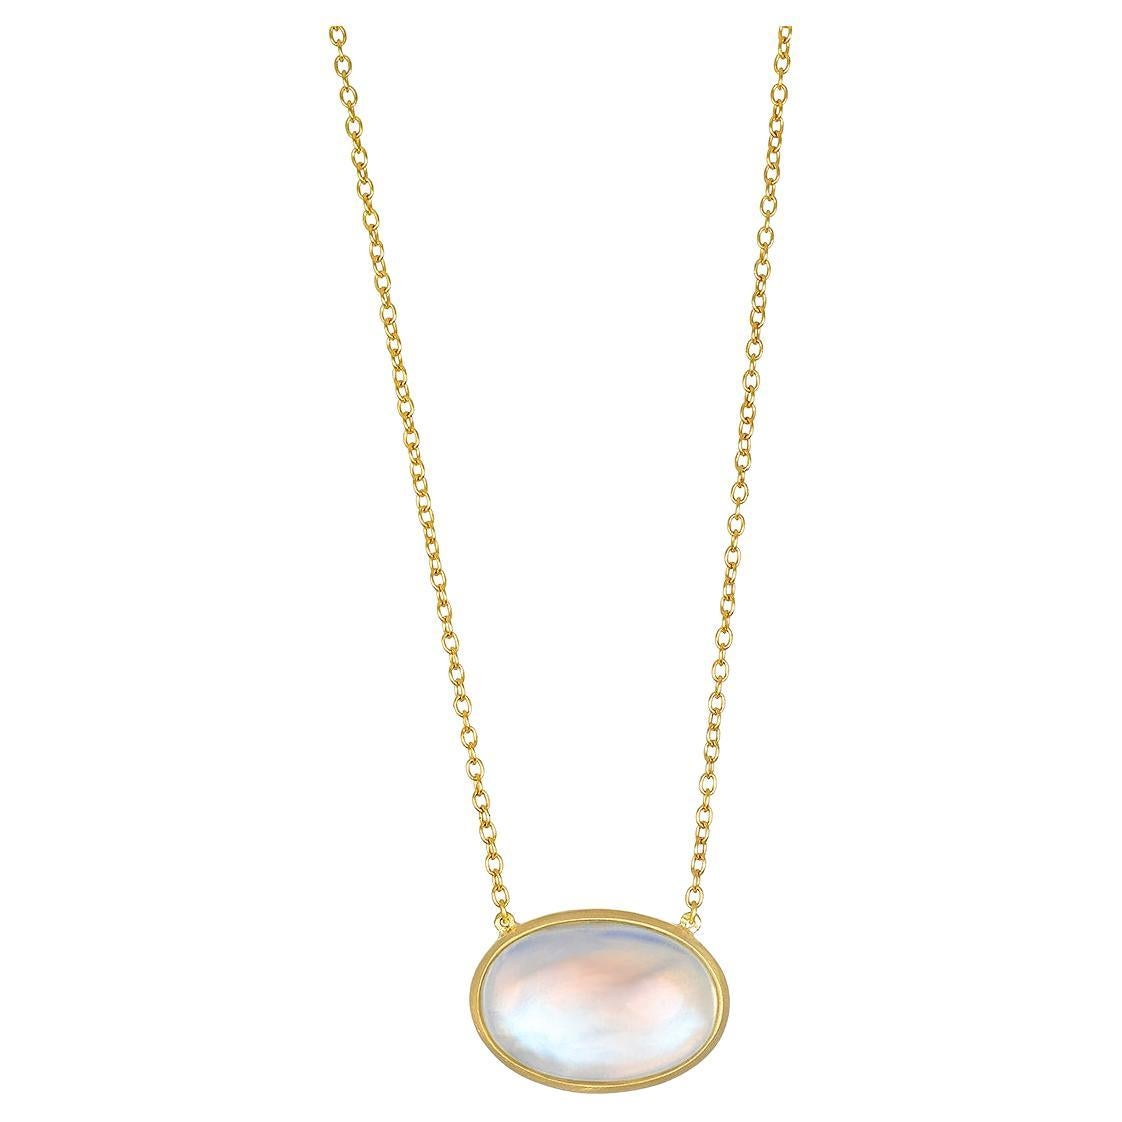 Faye Kim's 18 Karat Gold Oval Moonstone Pendant Necklace, suspended on a chain, is full of light and reflects beautiful translucent blue hues. The shape, polish, and matte gold finish enhance the moonstone's striking rainbow effect while at the same